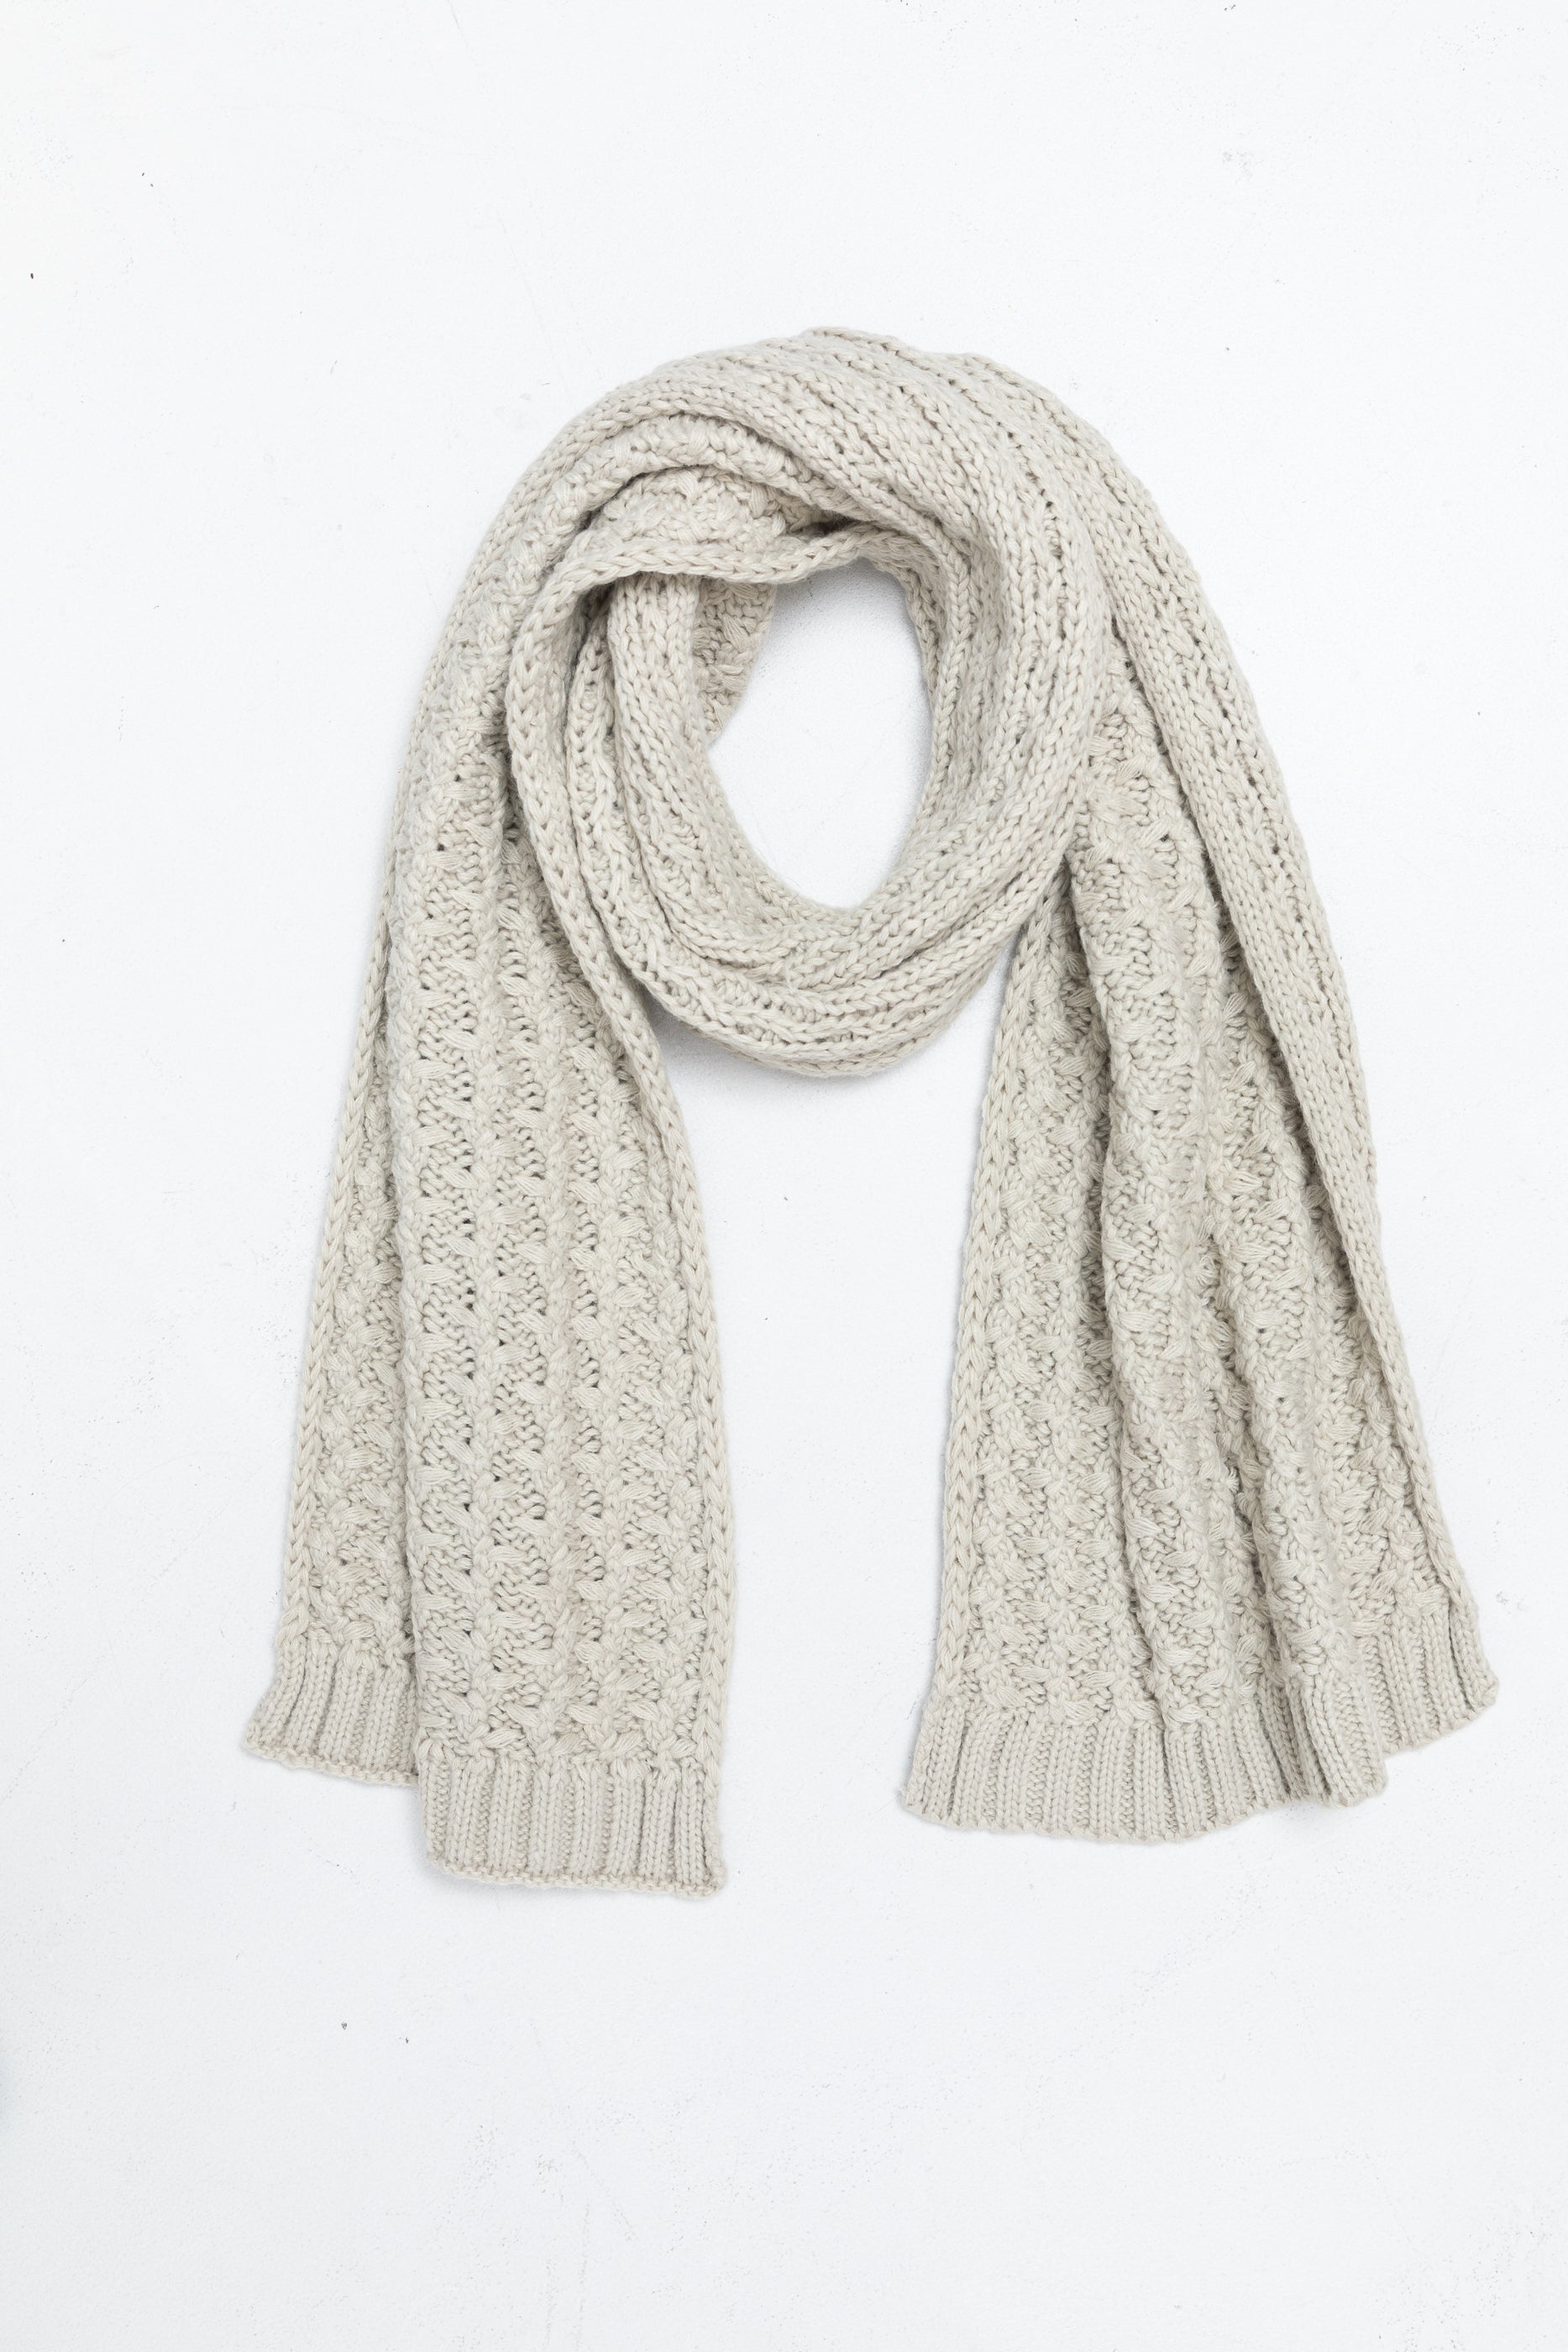 Mount Hotham Scarf - 3 Colours